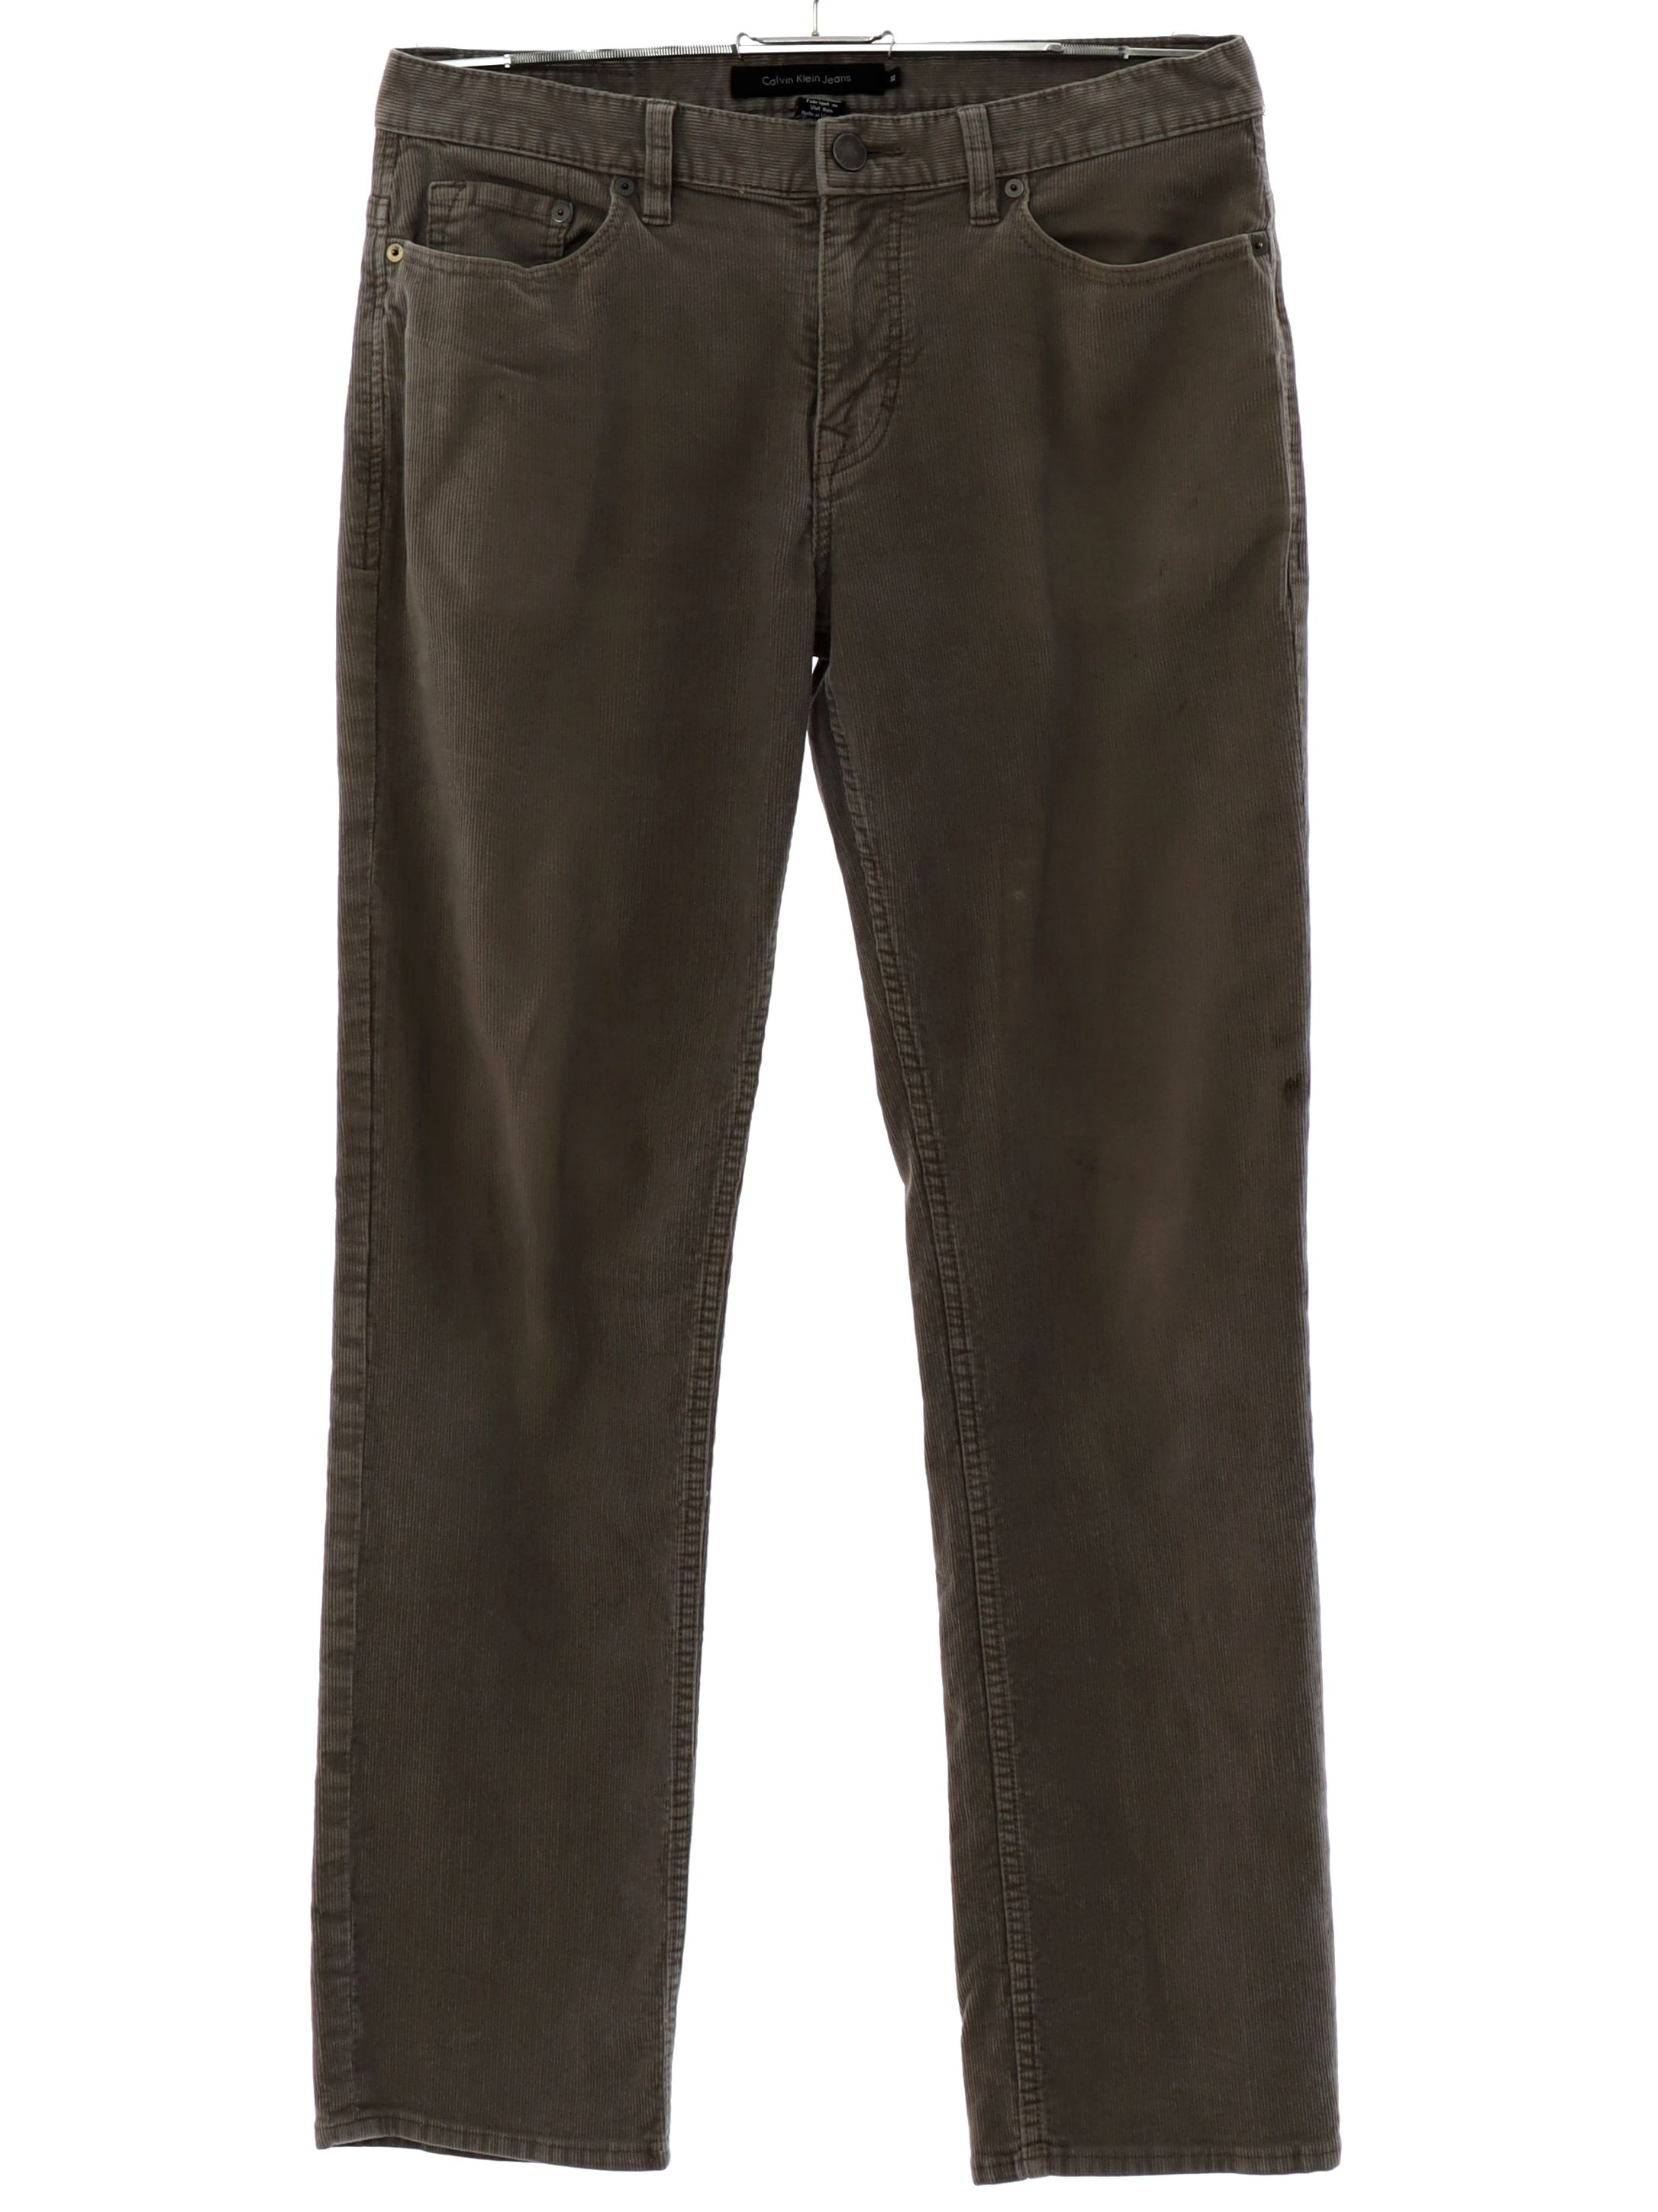 Pants: 90s -Calvin Klein Jeans- Mens tannish gray solid colored cotton ...